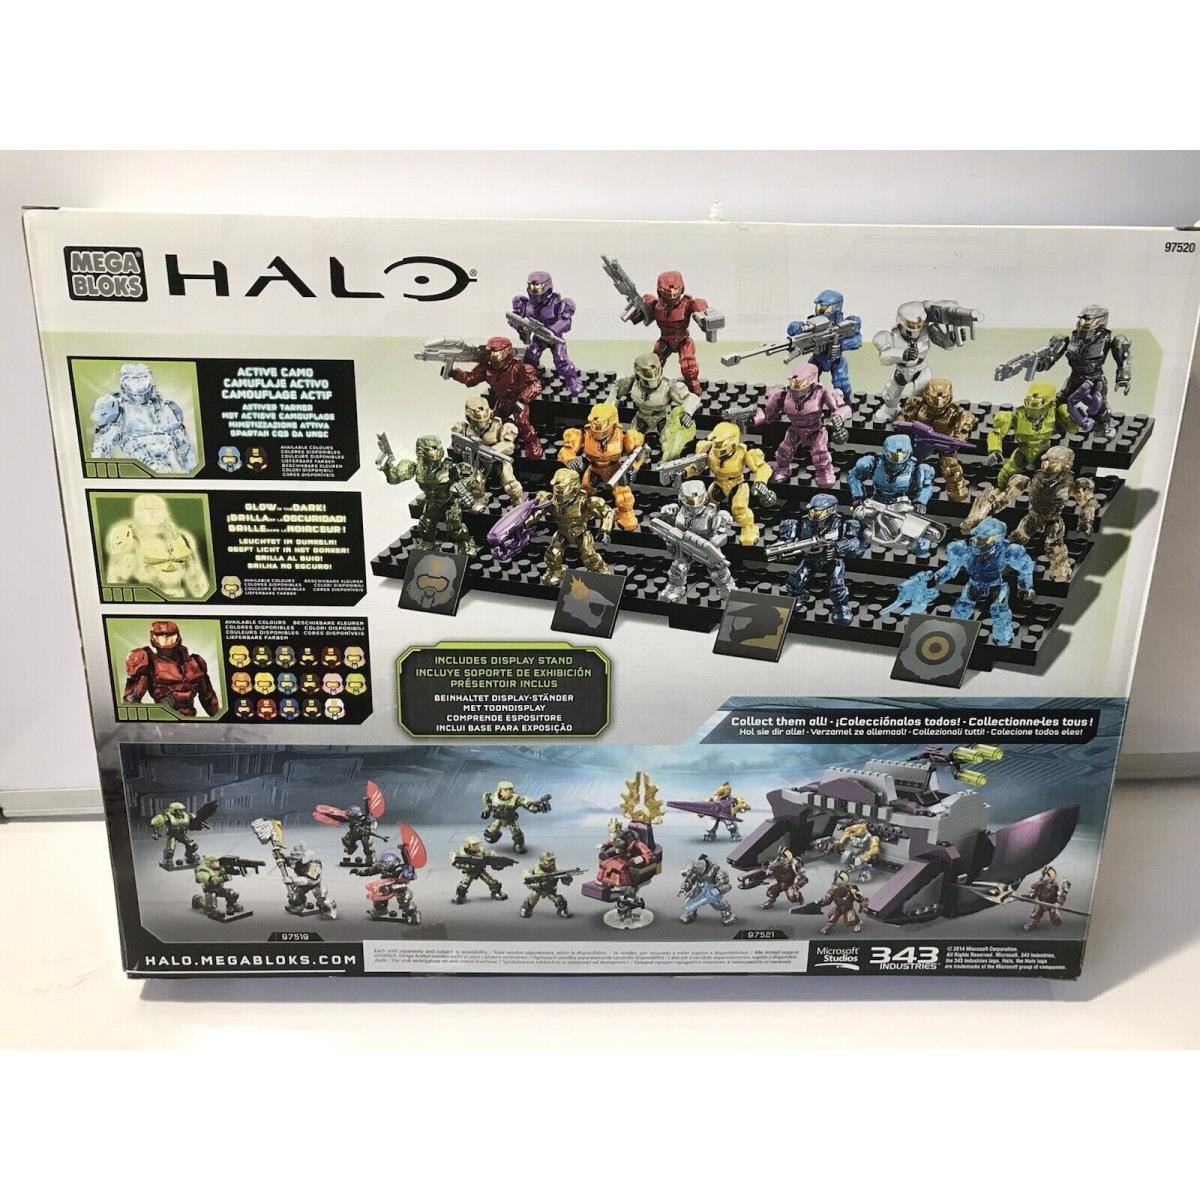 Mega Bloks Halo Spartan Tribute Pack Special Edition 97520 Boxes Not Mint Read